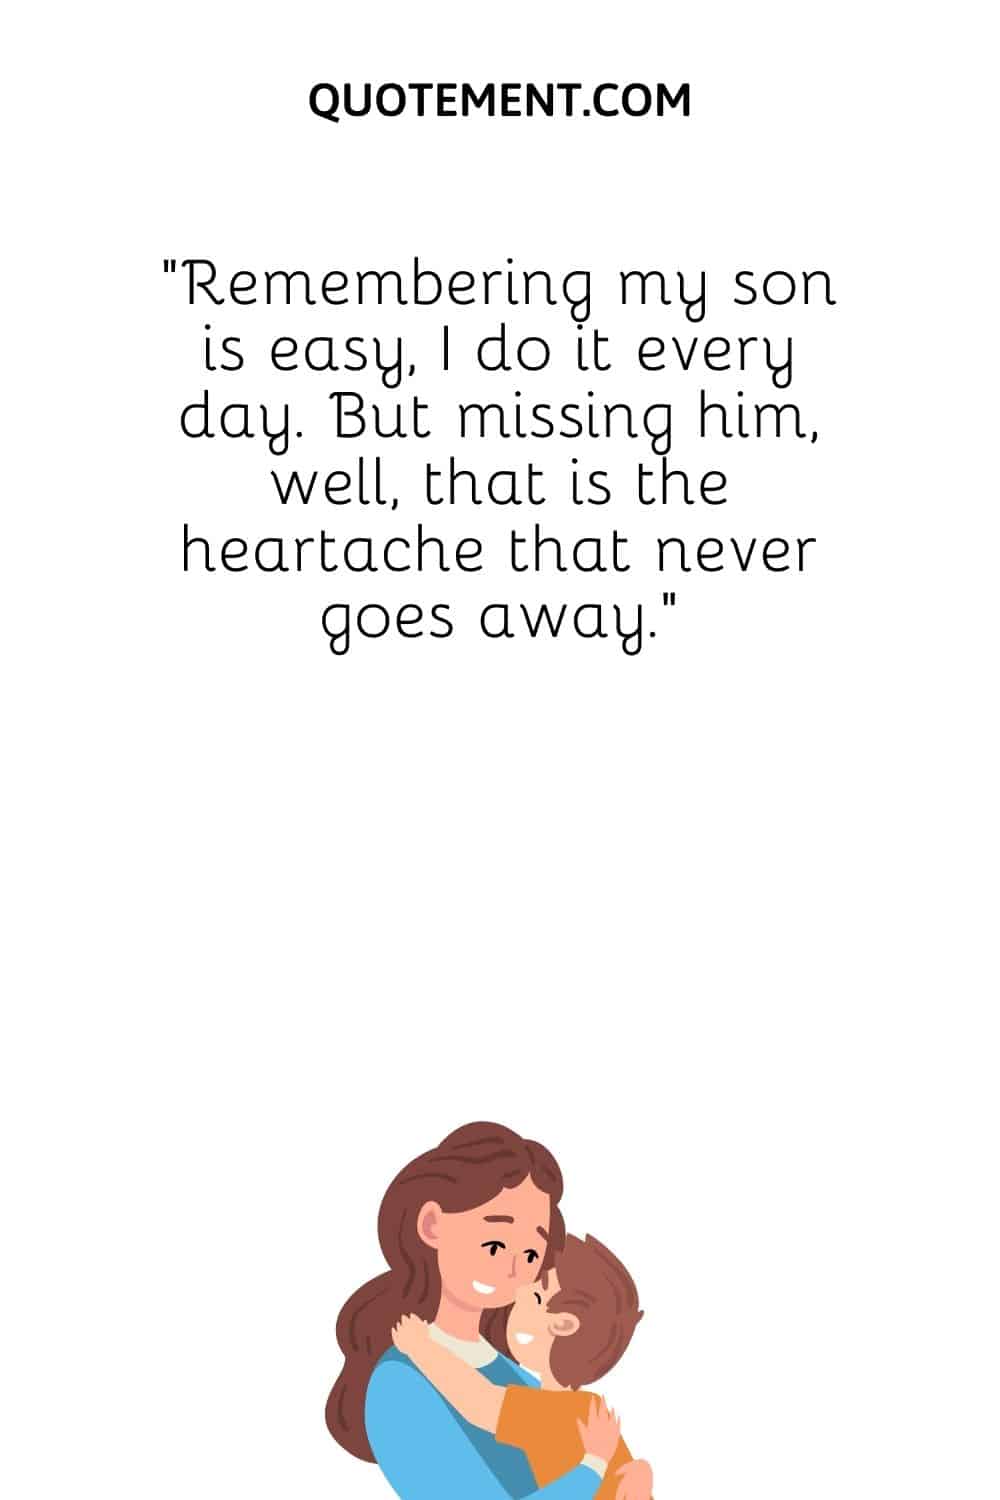 Remembering my son is easy, I do it every day.